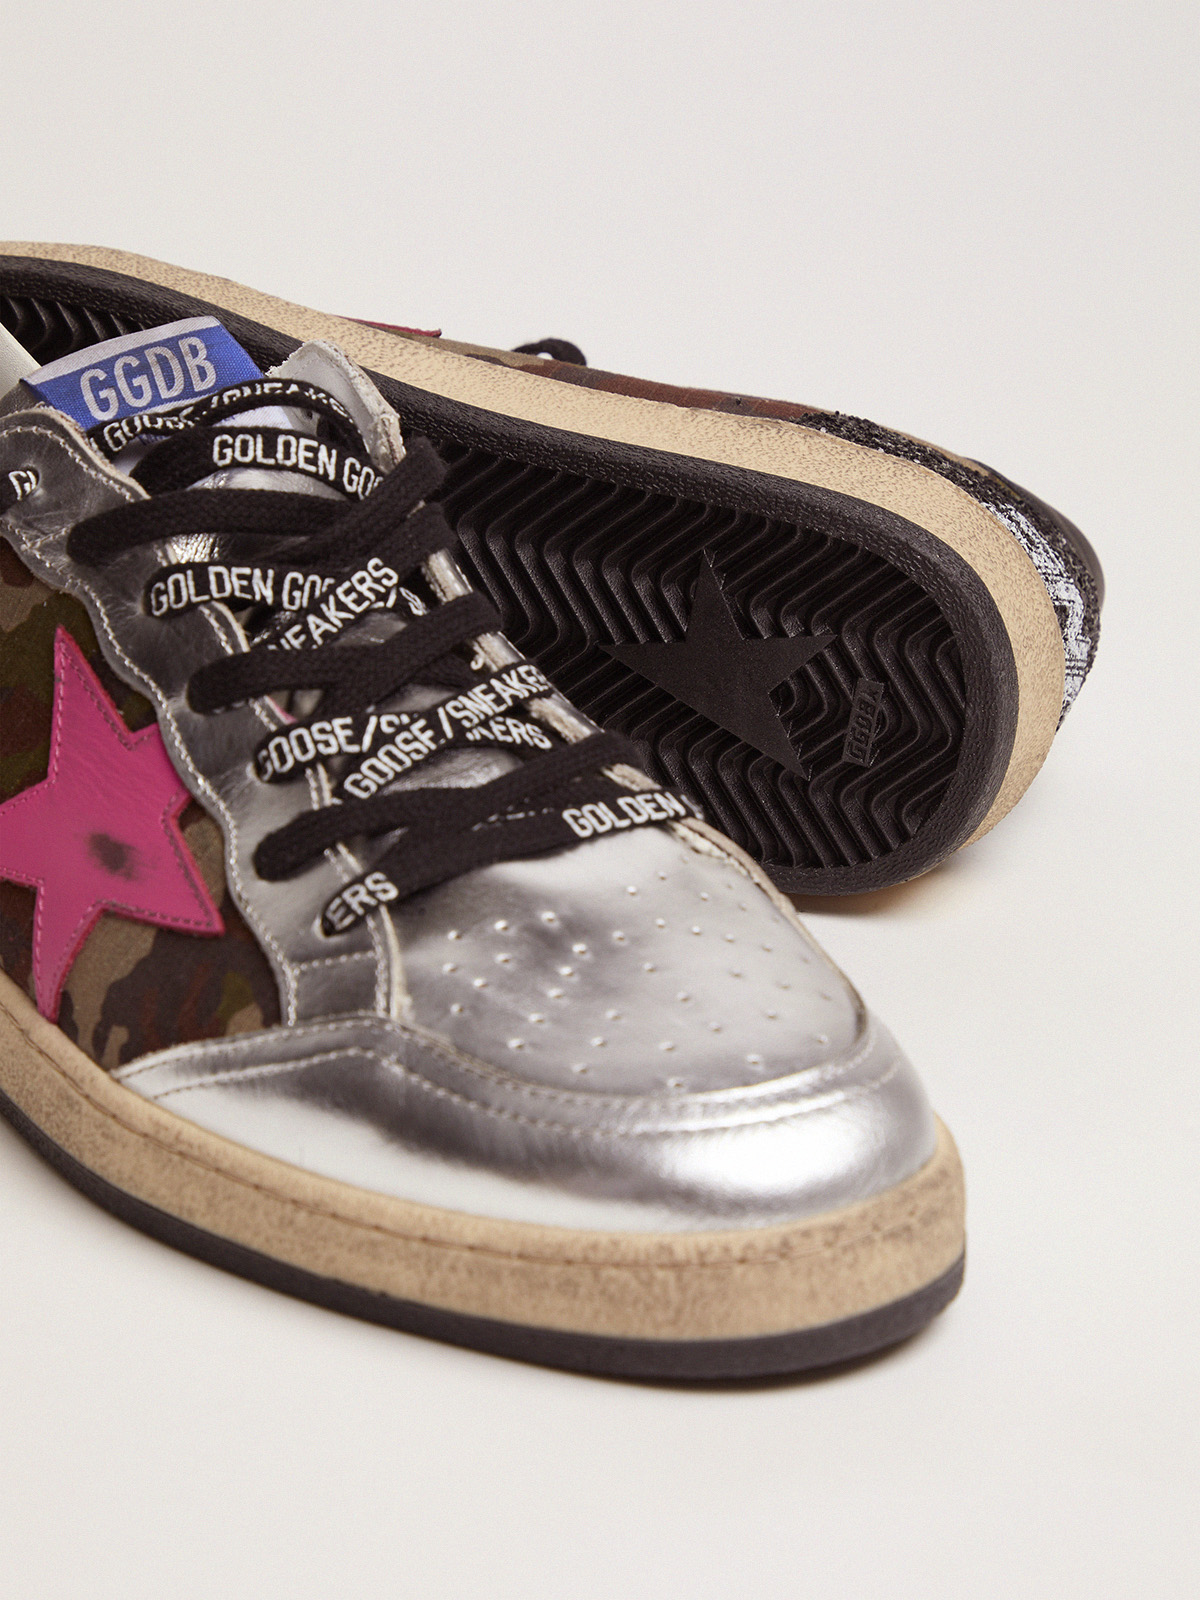 Ball Star LTD sneakers with camouflage print and fuchsia star | Golden Goose